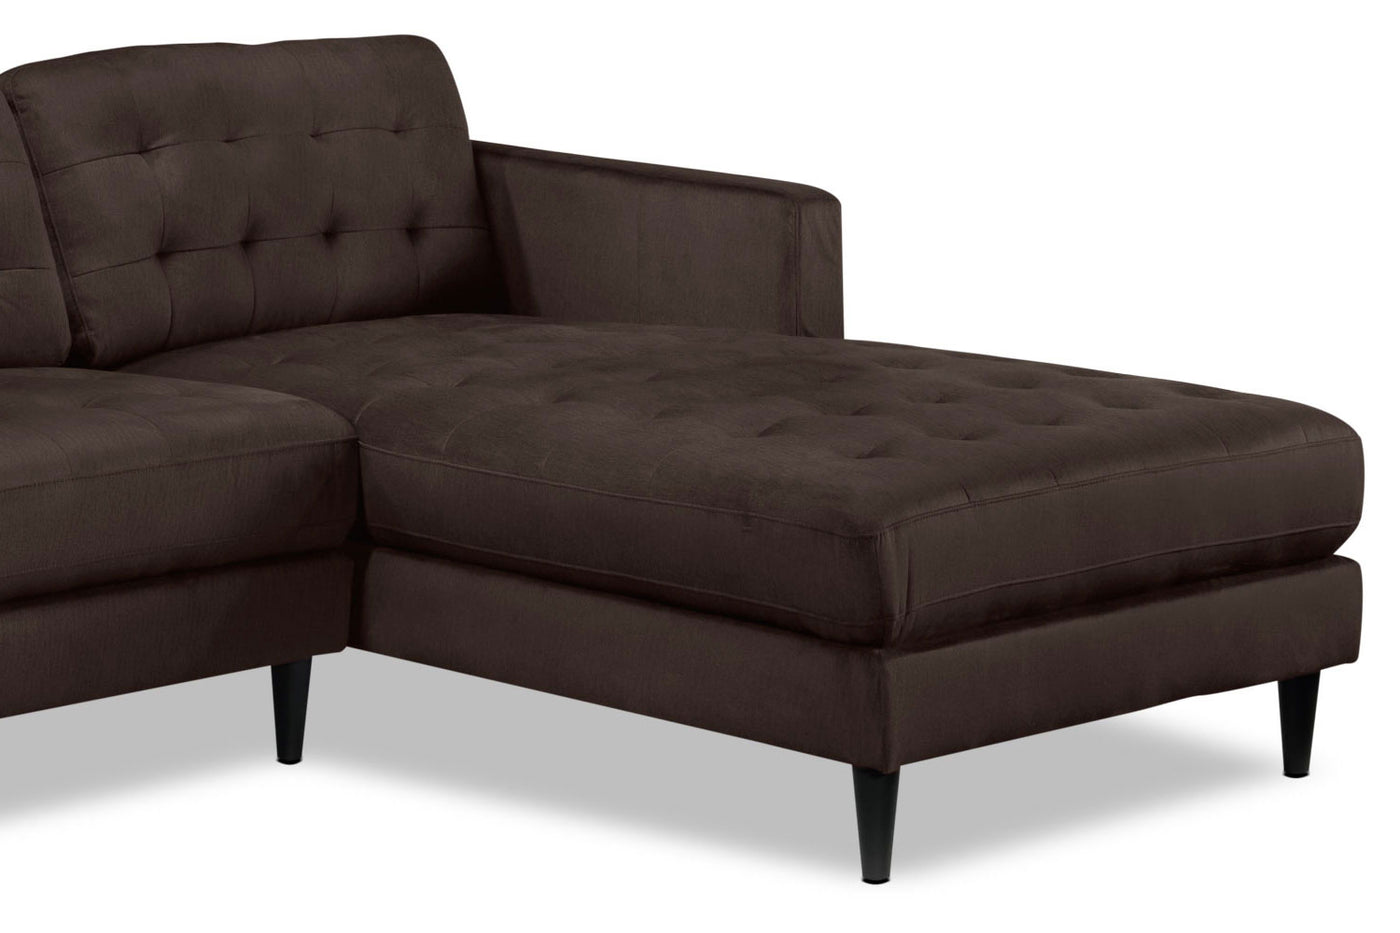 Paragon 2-Piece Sectional with Right-Facing Chaise - Dark Chocolate